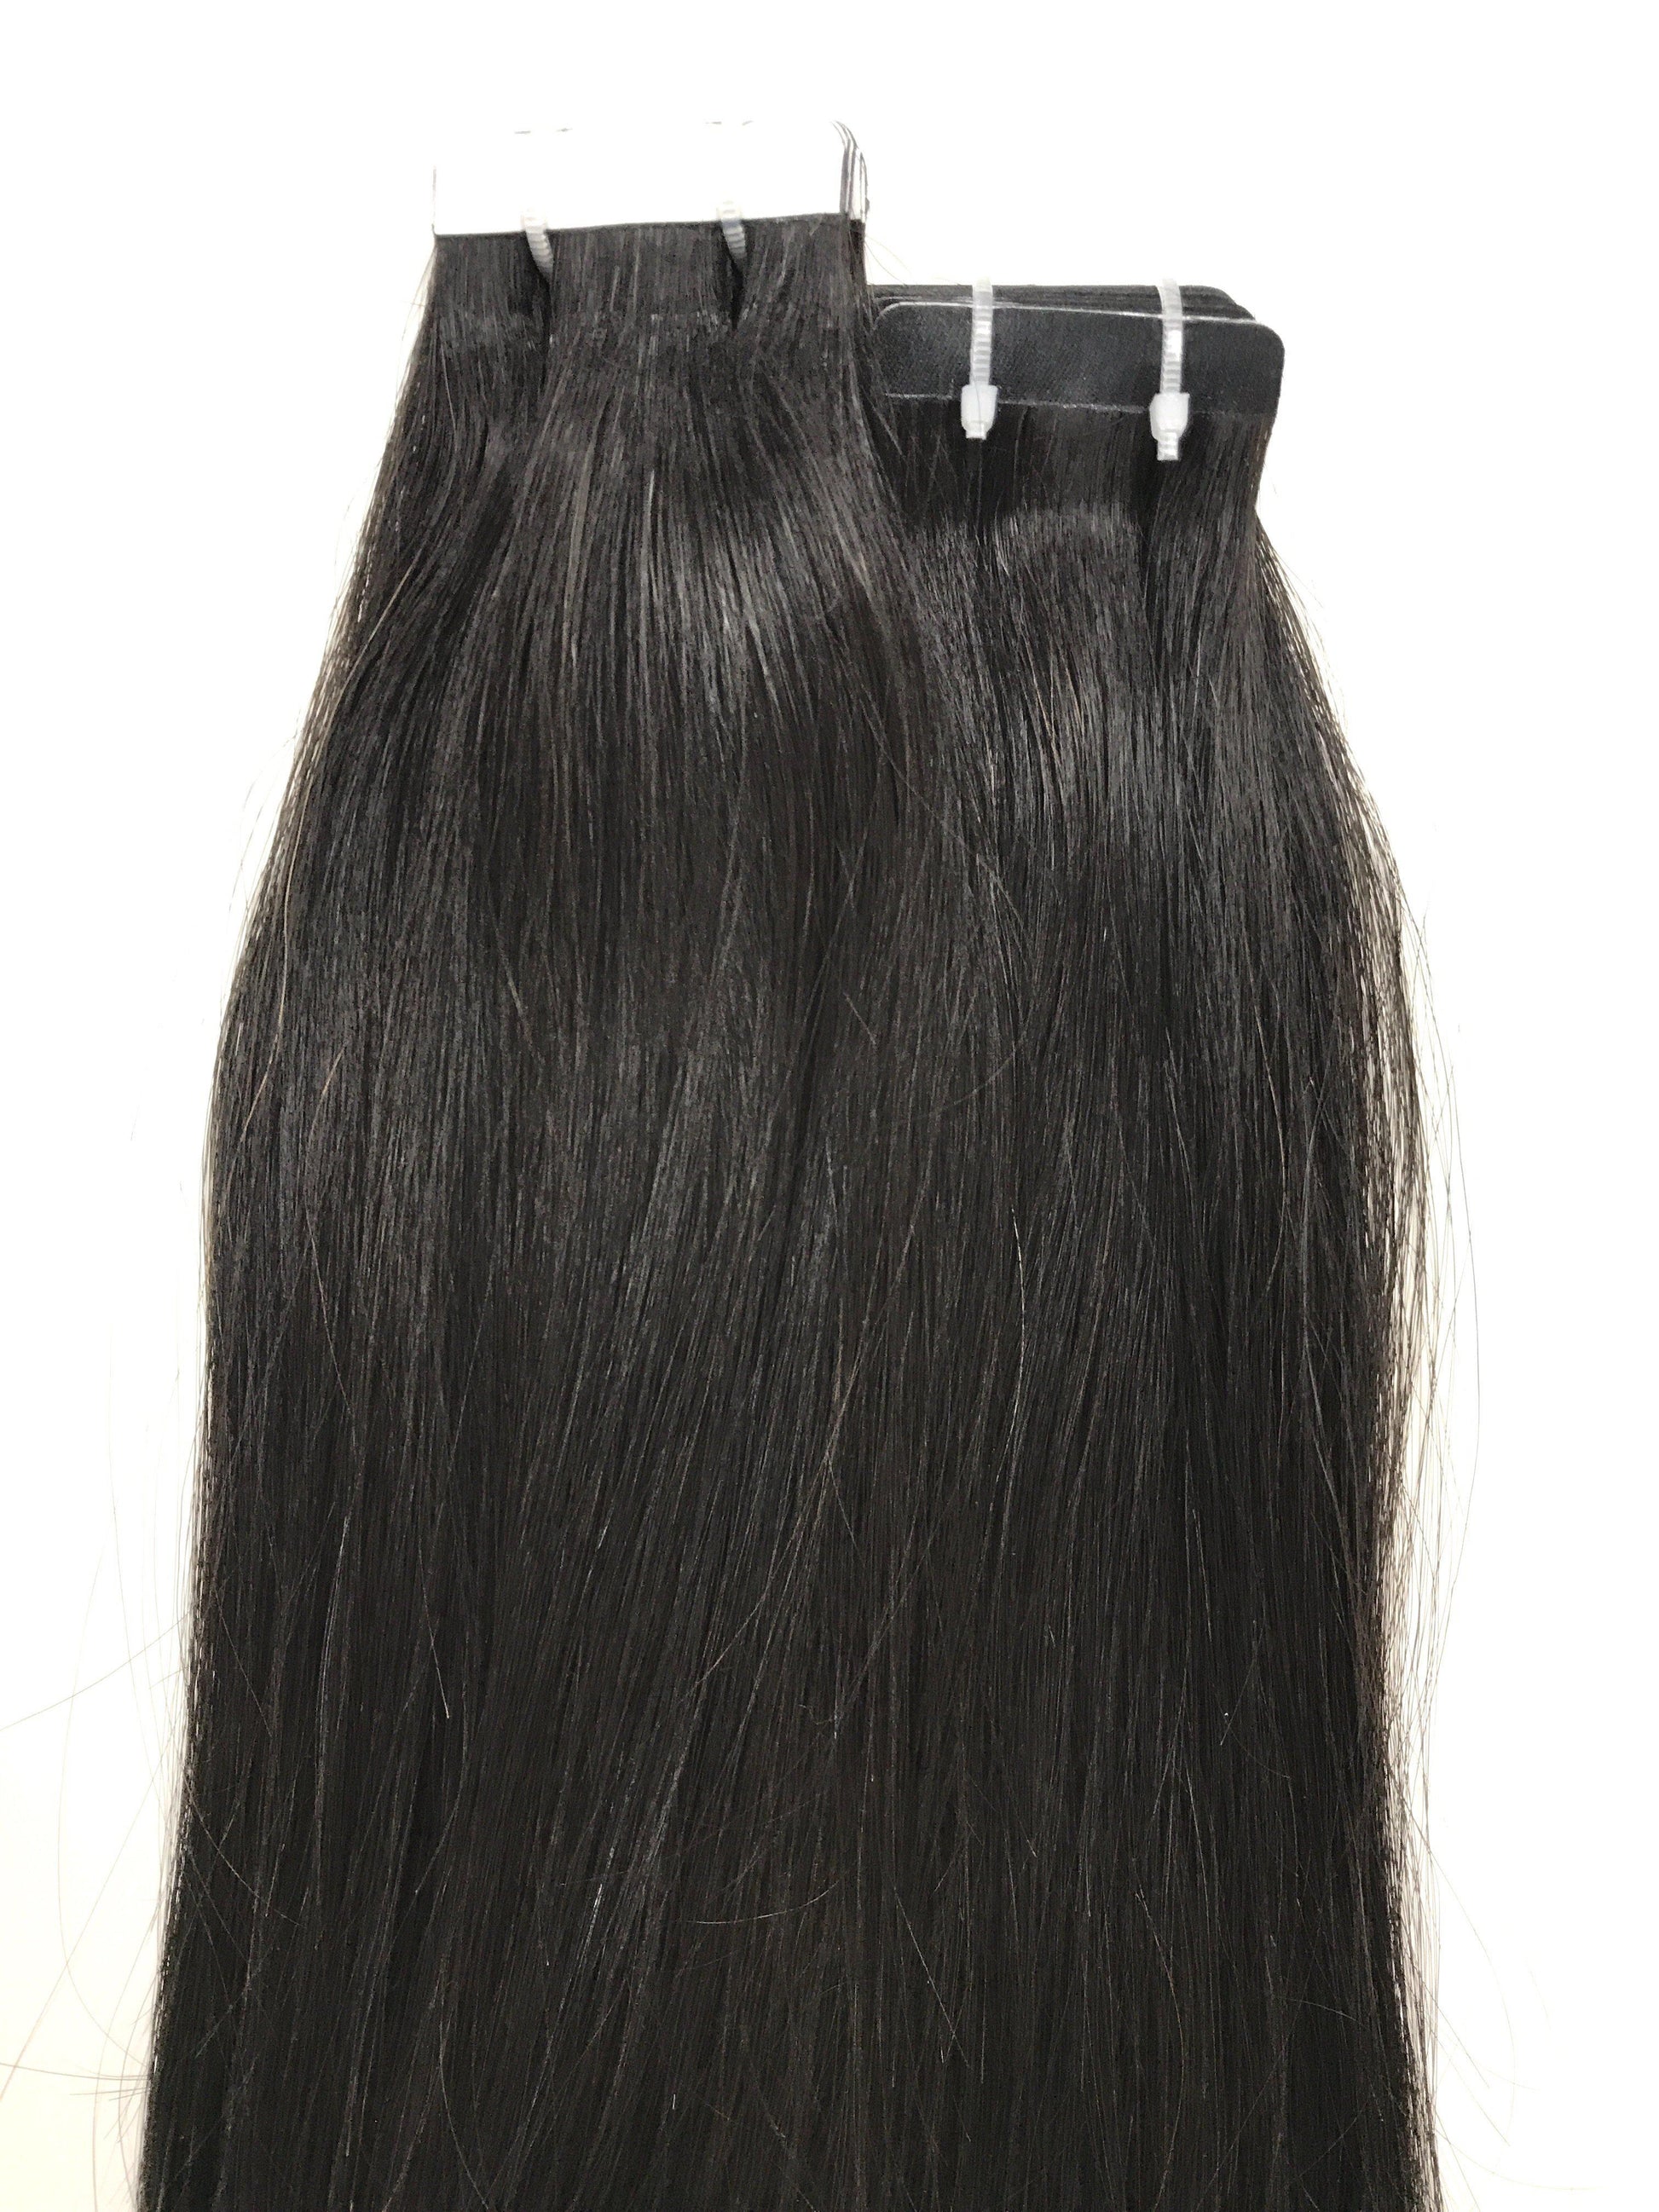 Brazilian Virgin Remy Human Hair, Tape Extensions, Straight, 24'', Virgin, Uncoloured. Quick Shipping!-Virgin Hair & Beauty, The Best Hair Extensions, Real Virgin Human Hair.